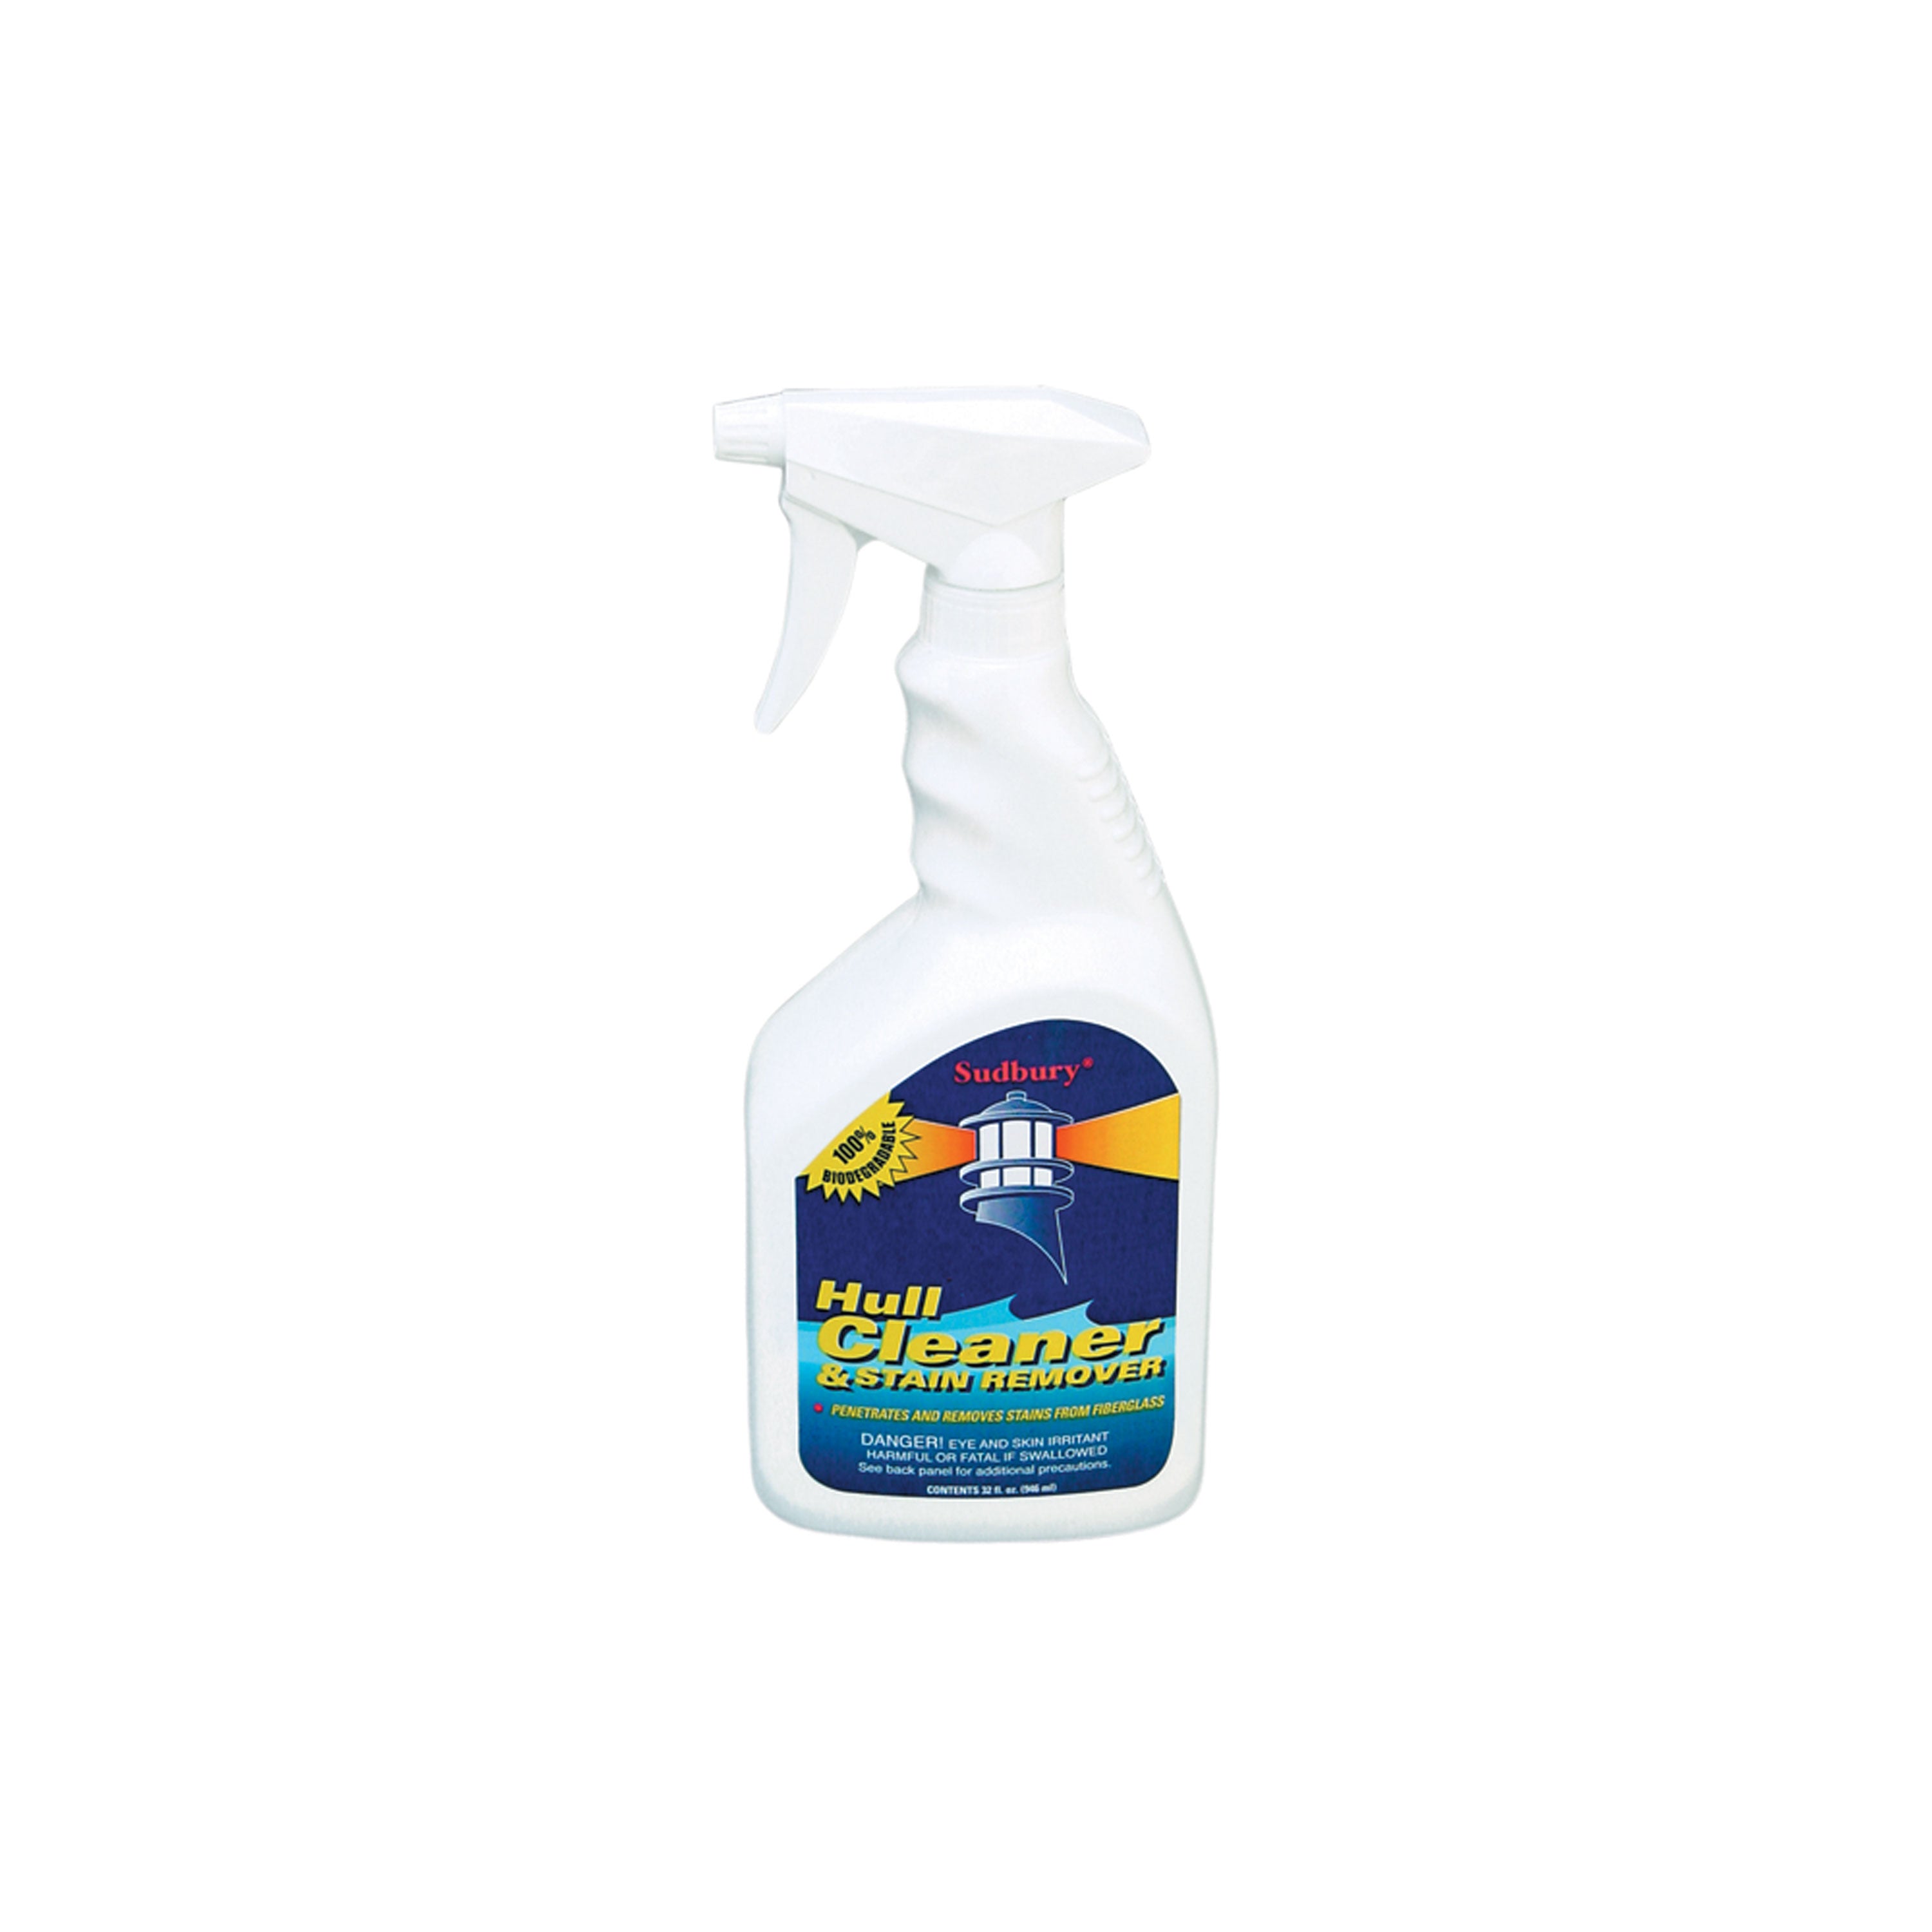 Sudbury 815Q Hull Cleaner and Stain Remover - 32 oz.